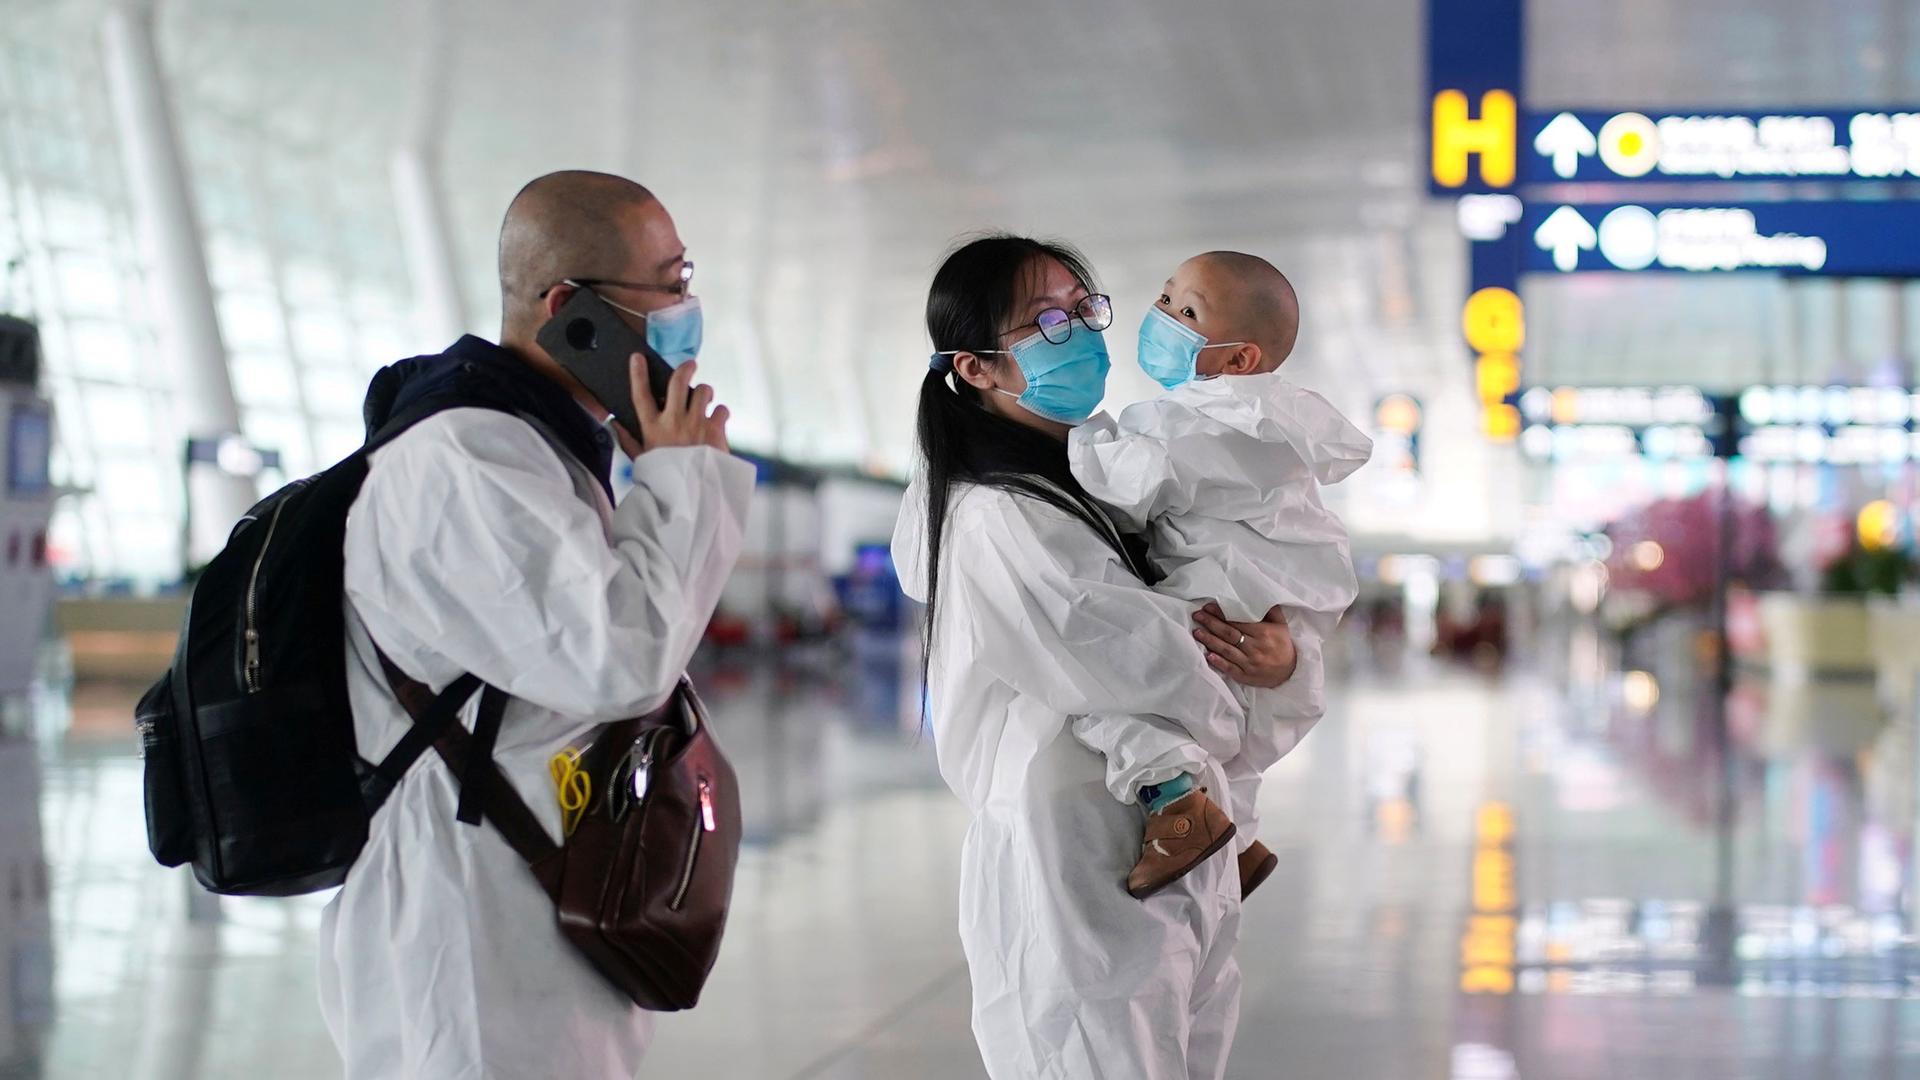 Travelers in white protective suits and face masks are shown, with one talking on a mobile phone and the other holding a small child.